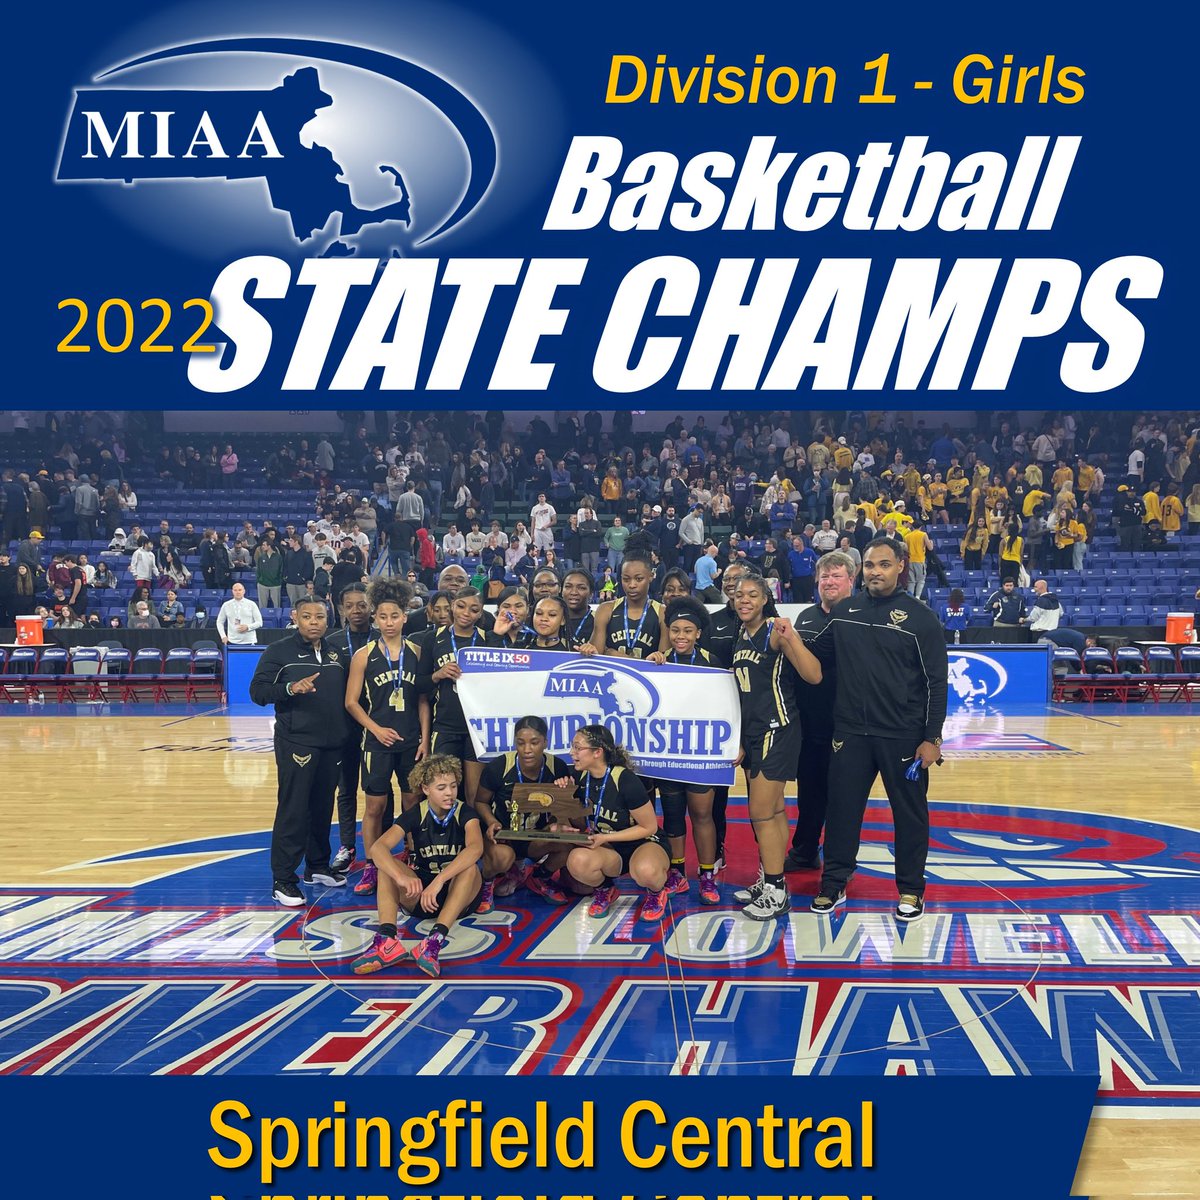 Congratulations to Lady Eagles on your victory and becoming D1 Massachusetts State Champs!!